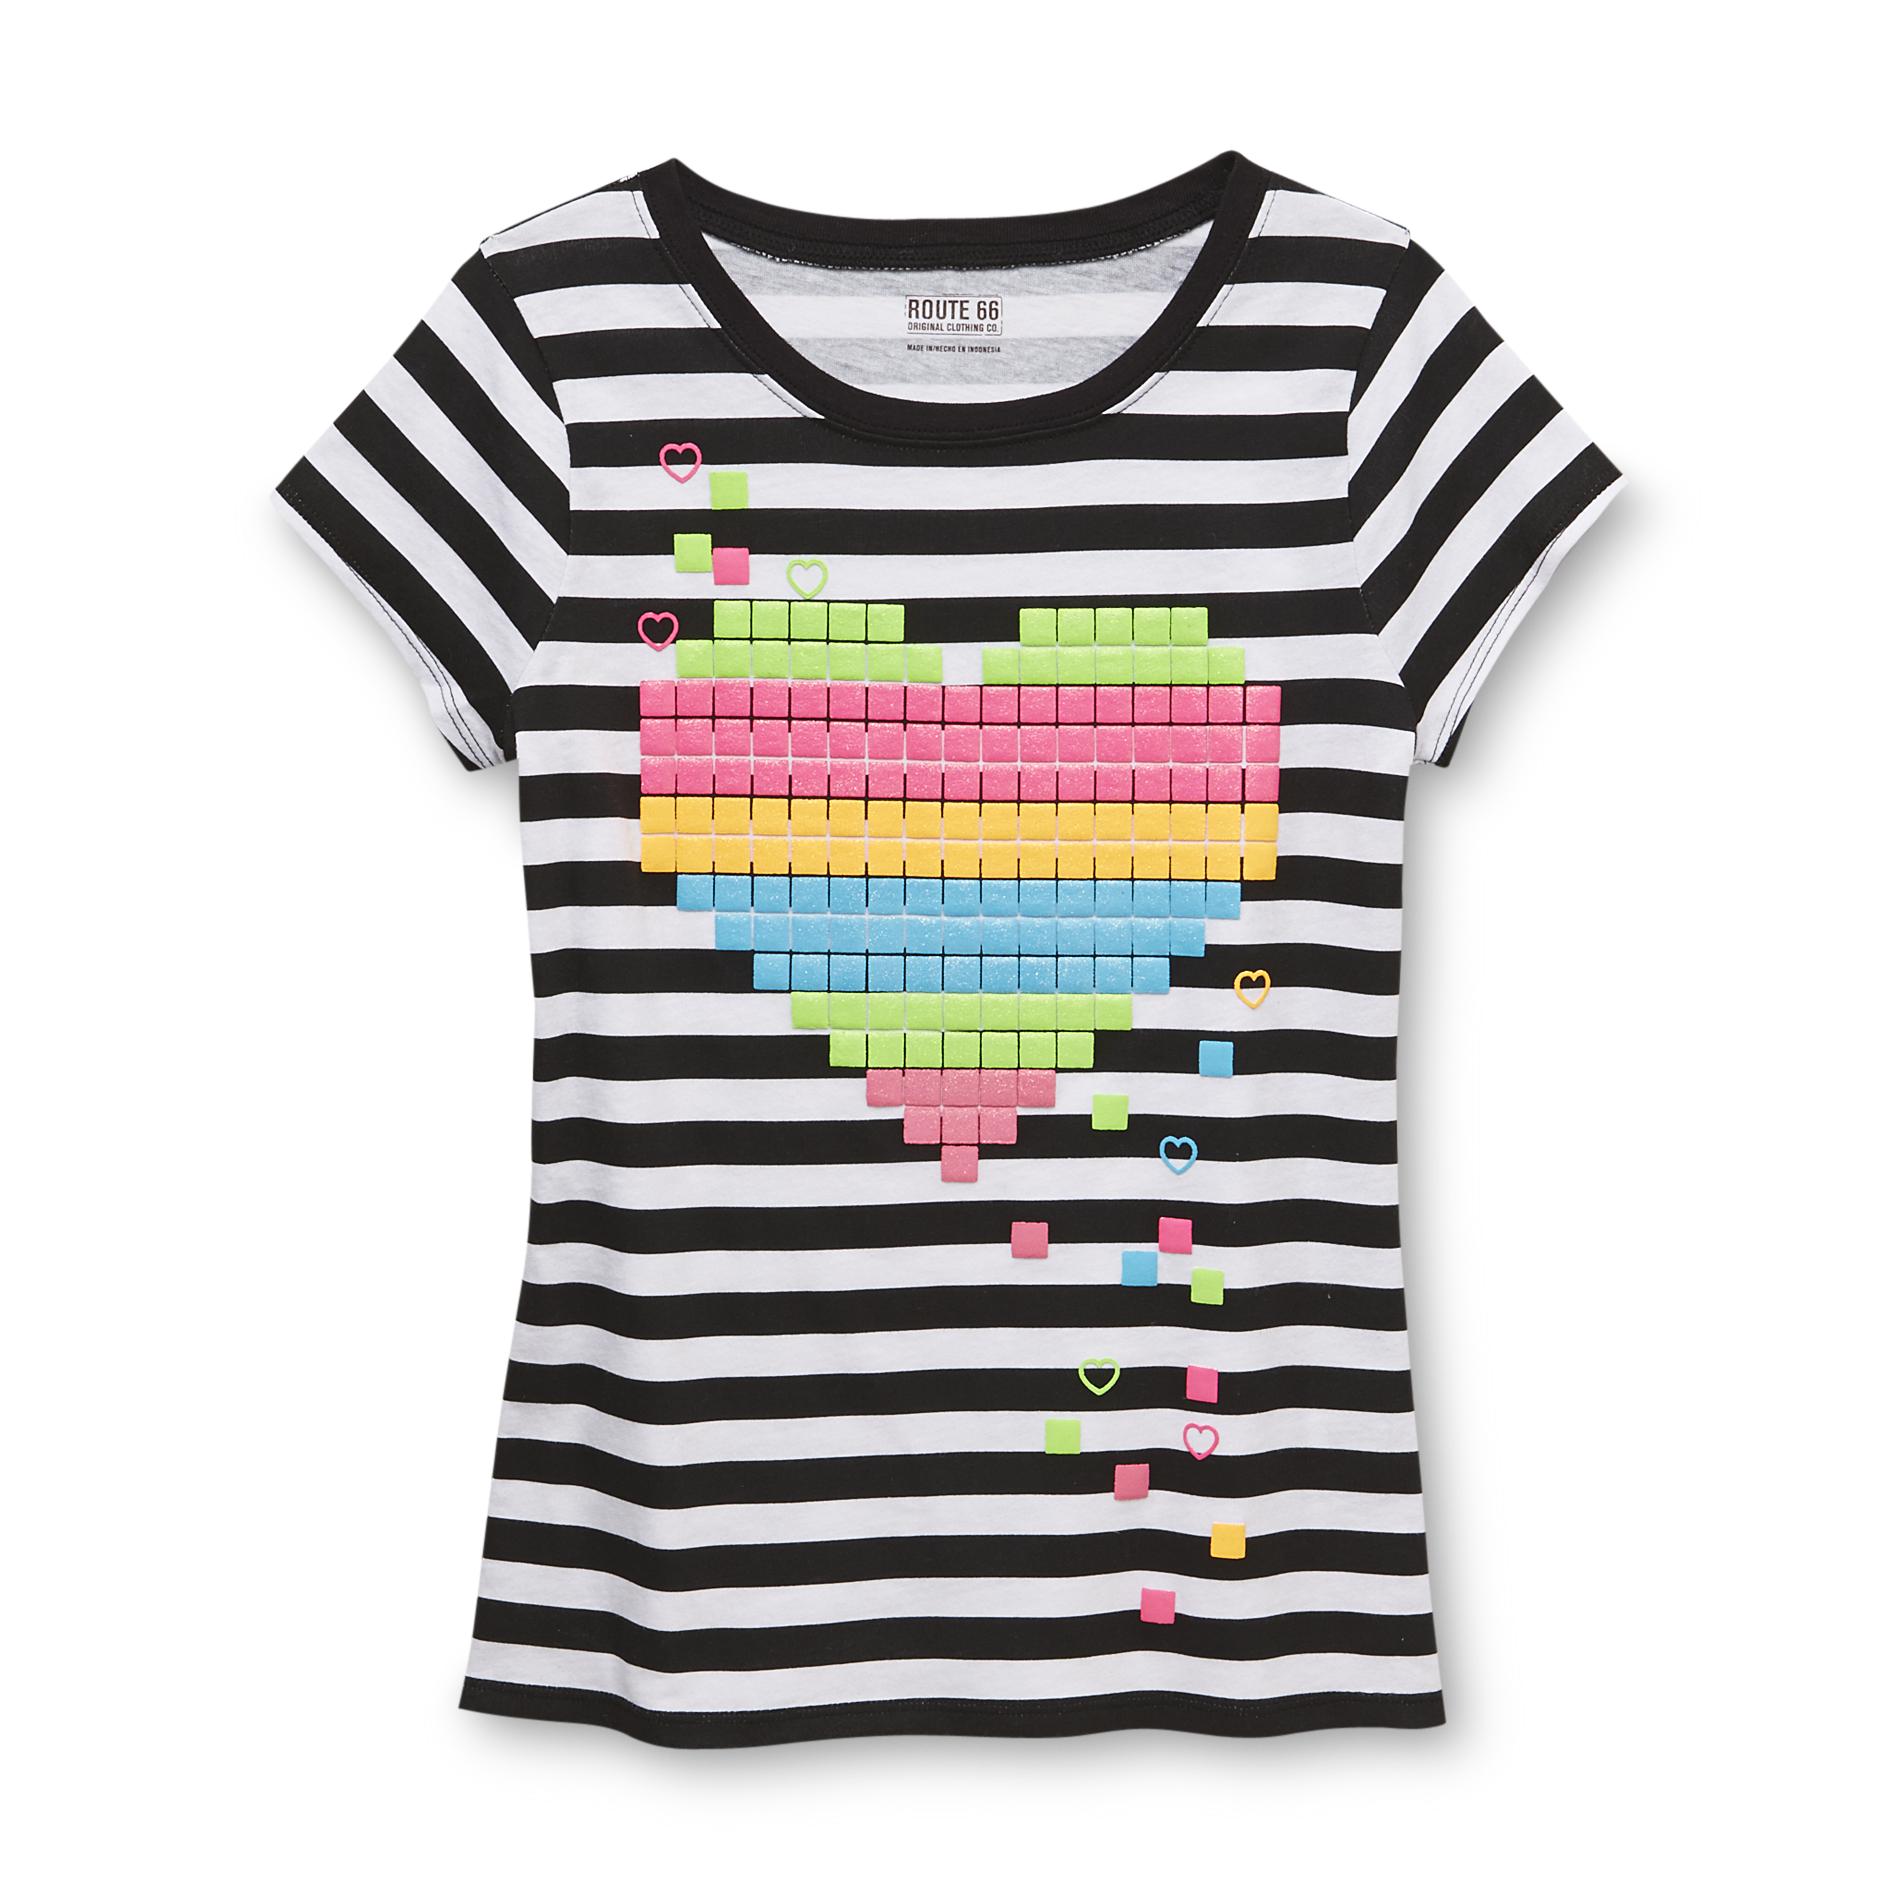 Route 66 Girl's Graphic T-Shirt - Stripes & Heart